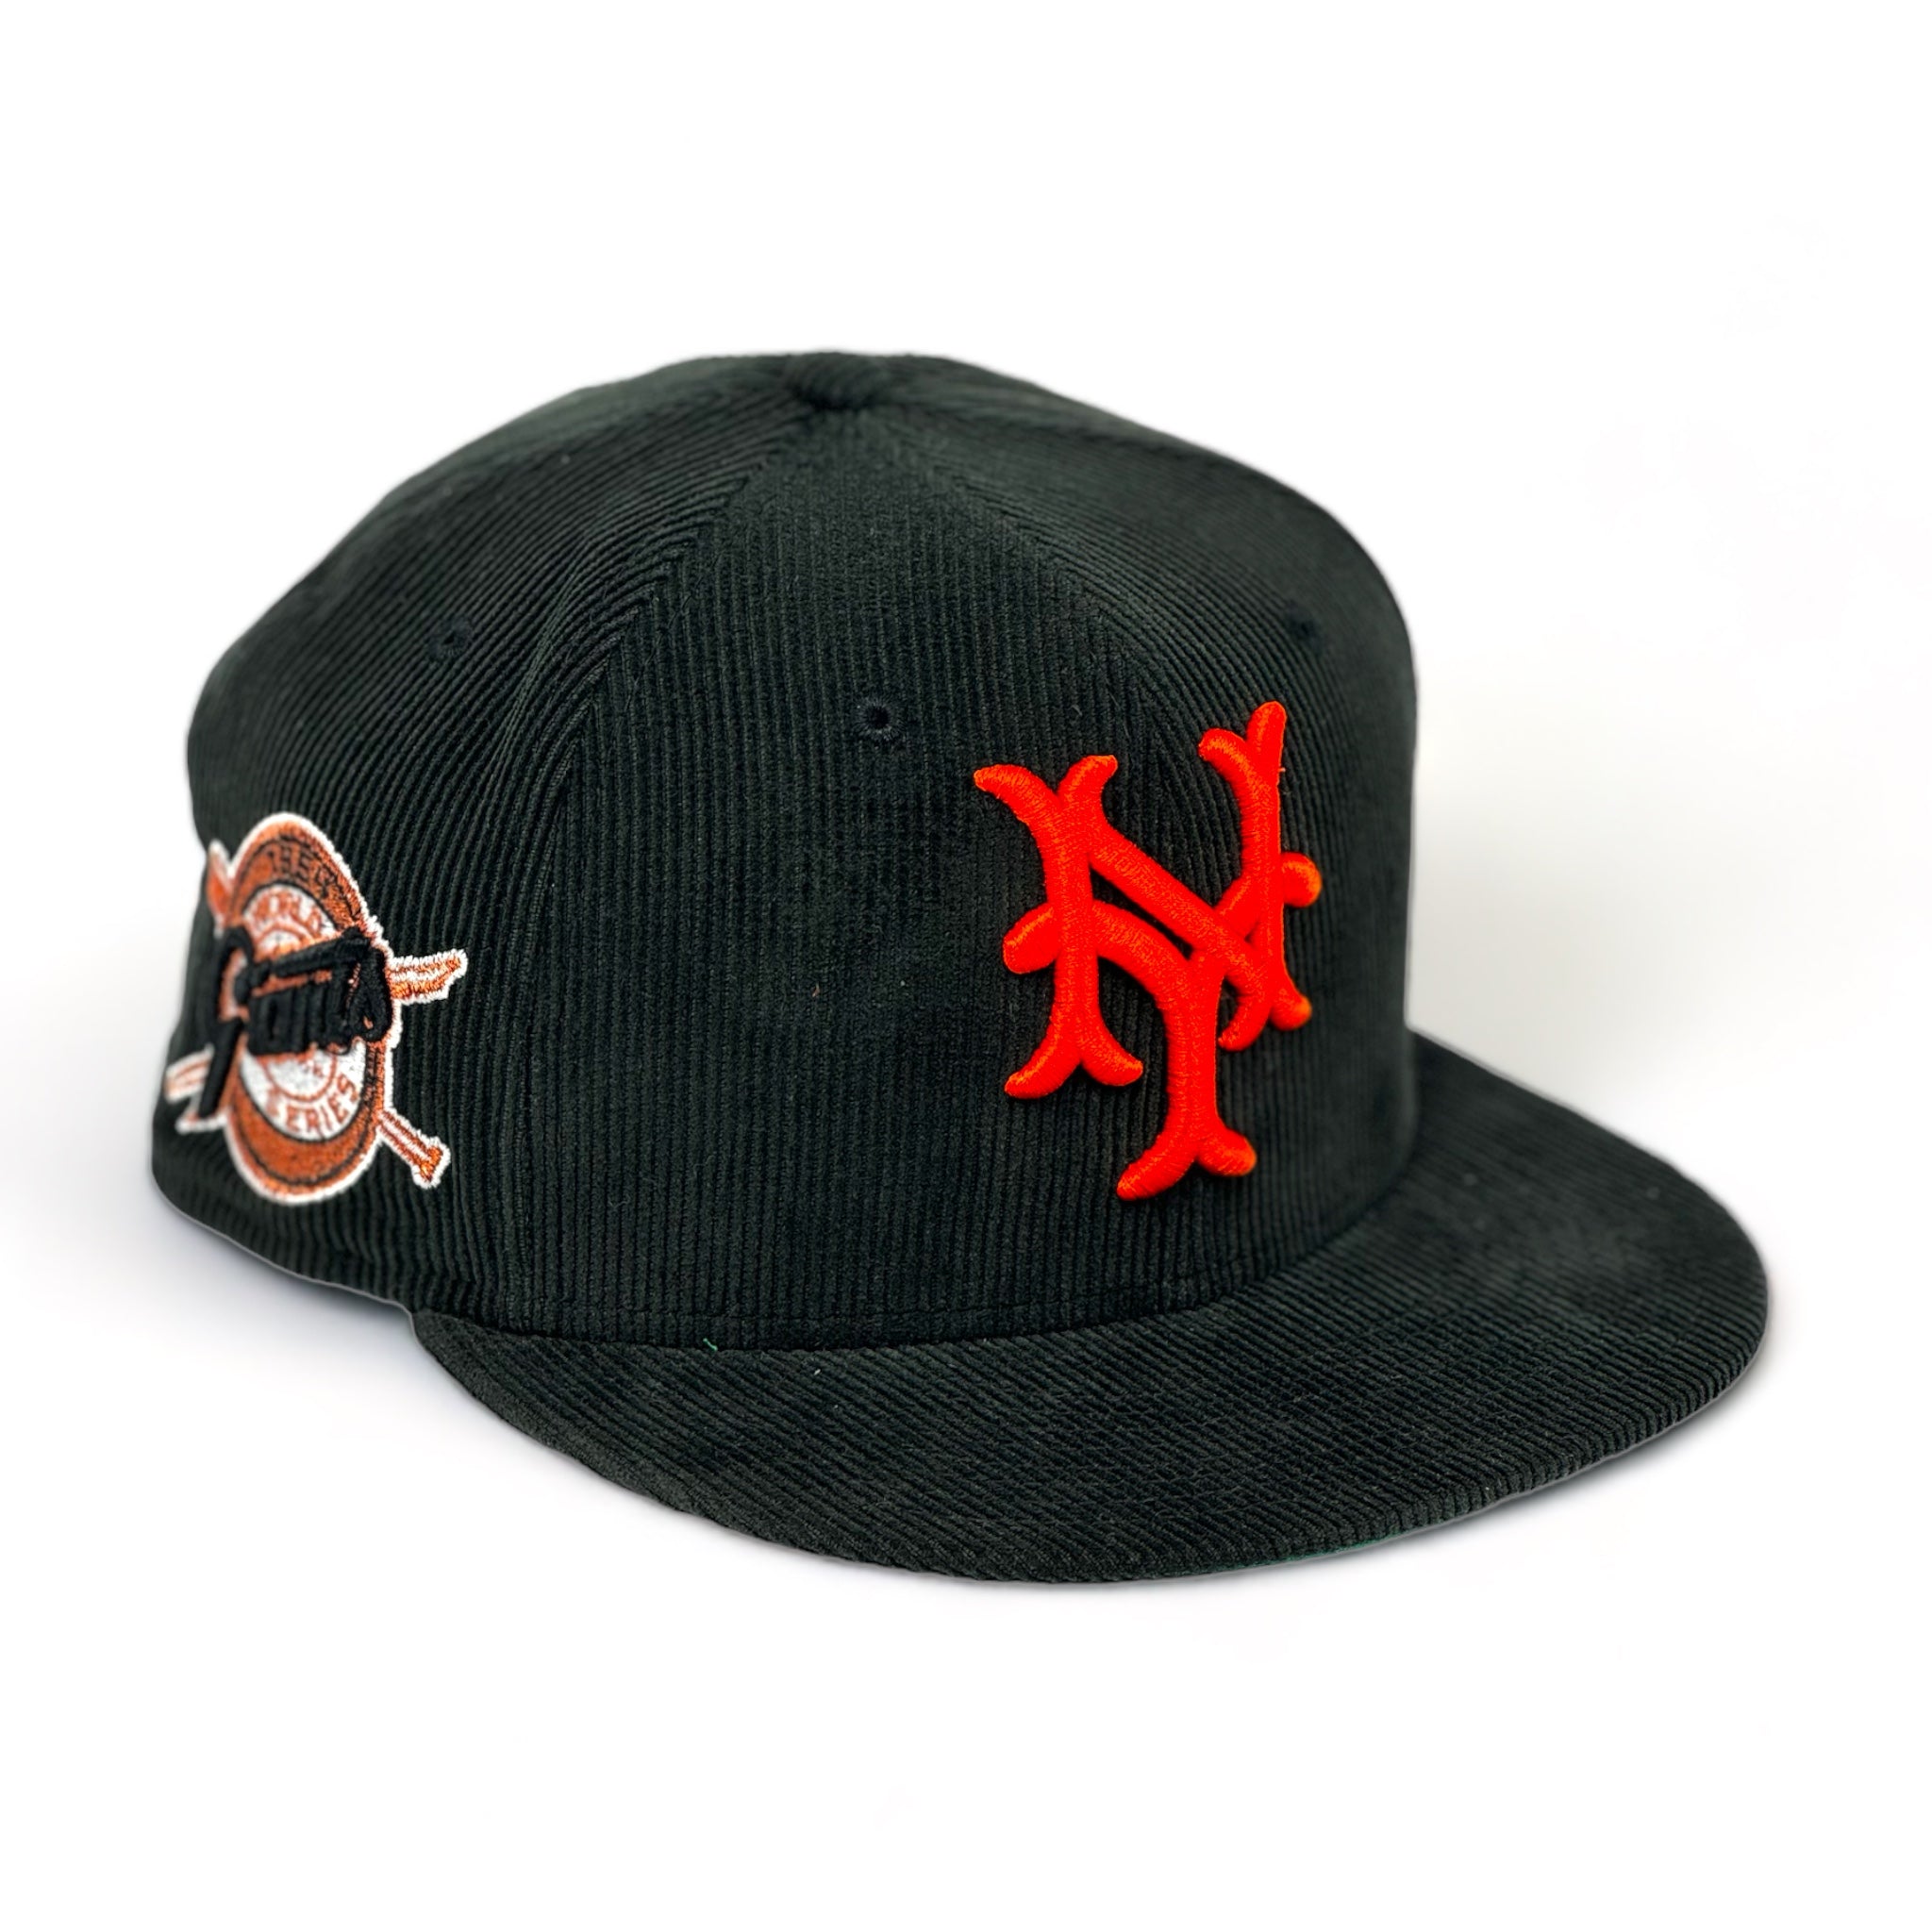 NEW YORK GIANTS (CORDUROY) (1954 WORLD SERIES) NEW ERA 59FIFTY FITTED (GREEN UNDER VISOR)